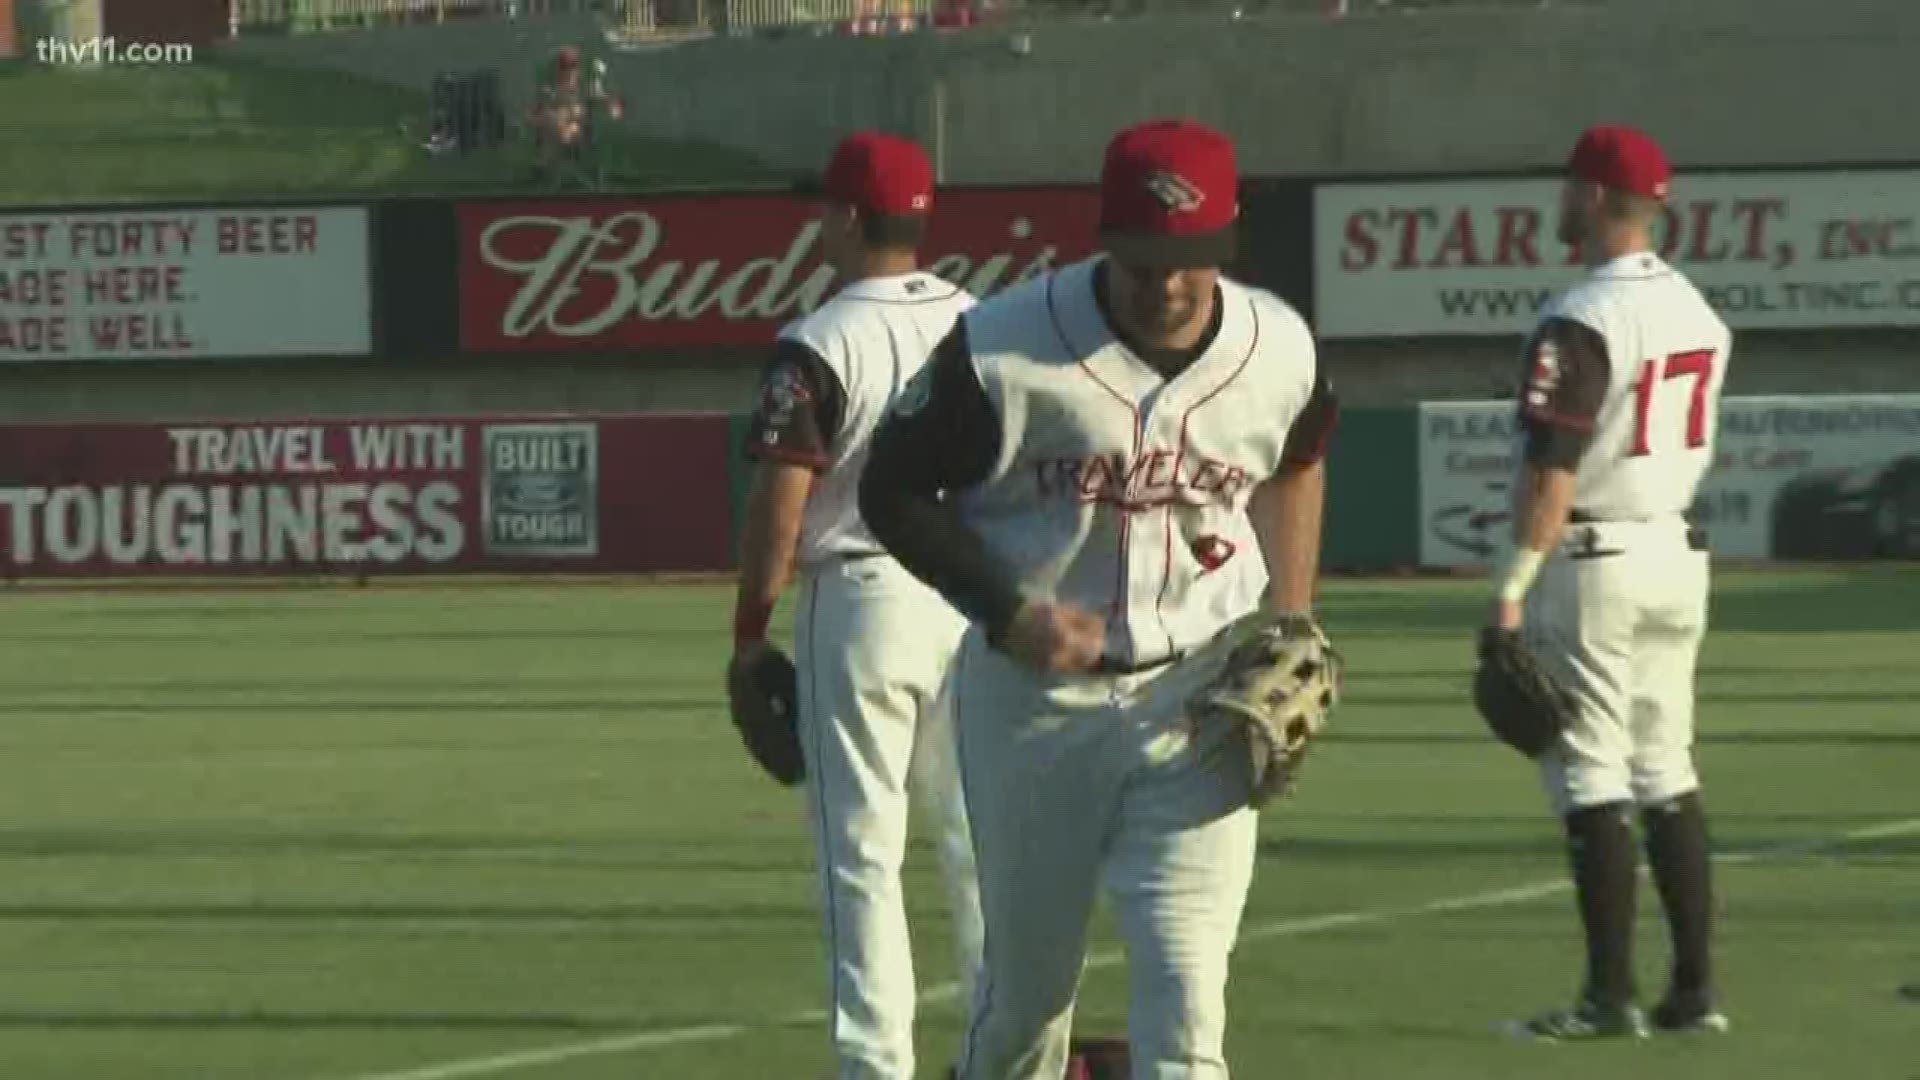 Travs take series over Springfield with 7-2 win